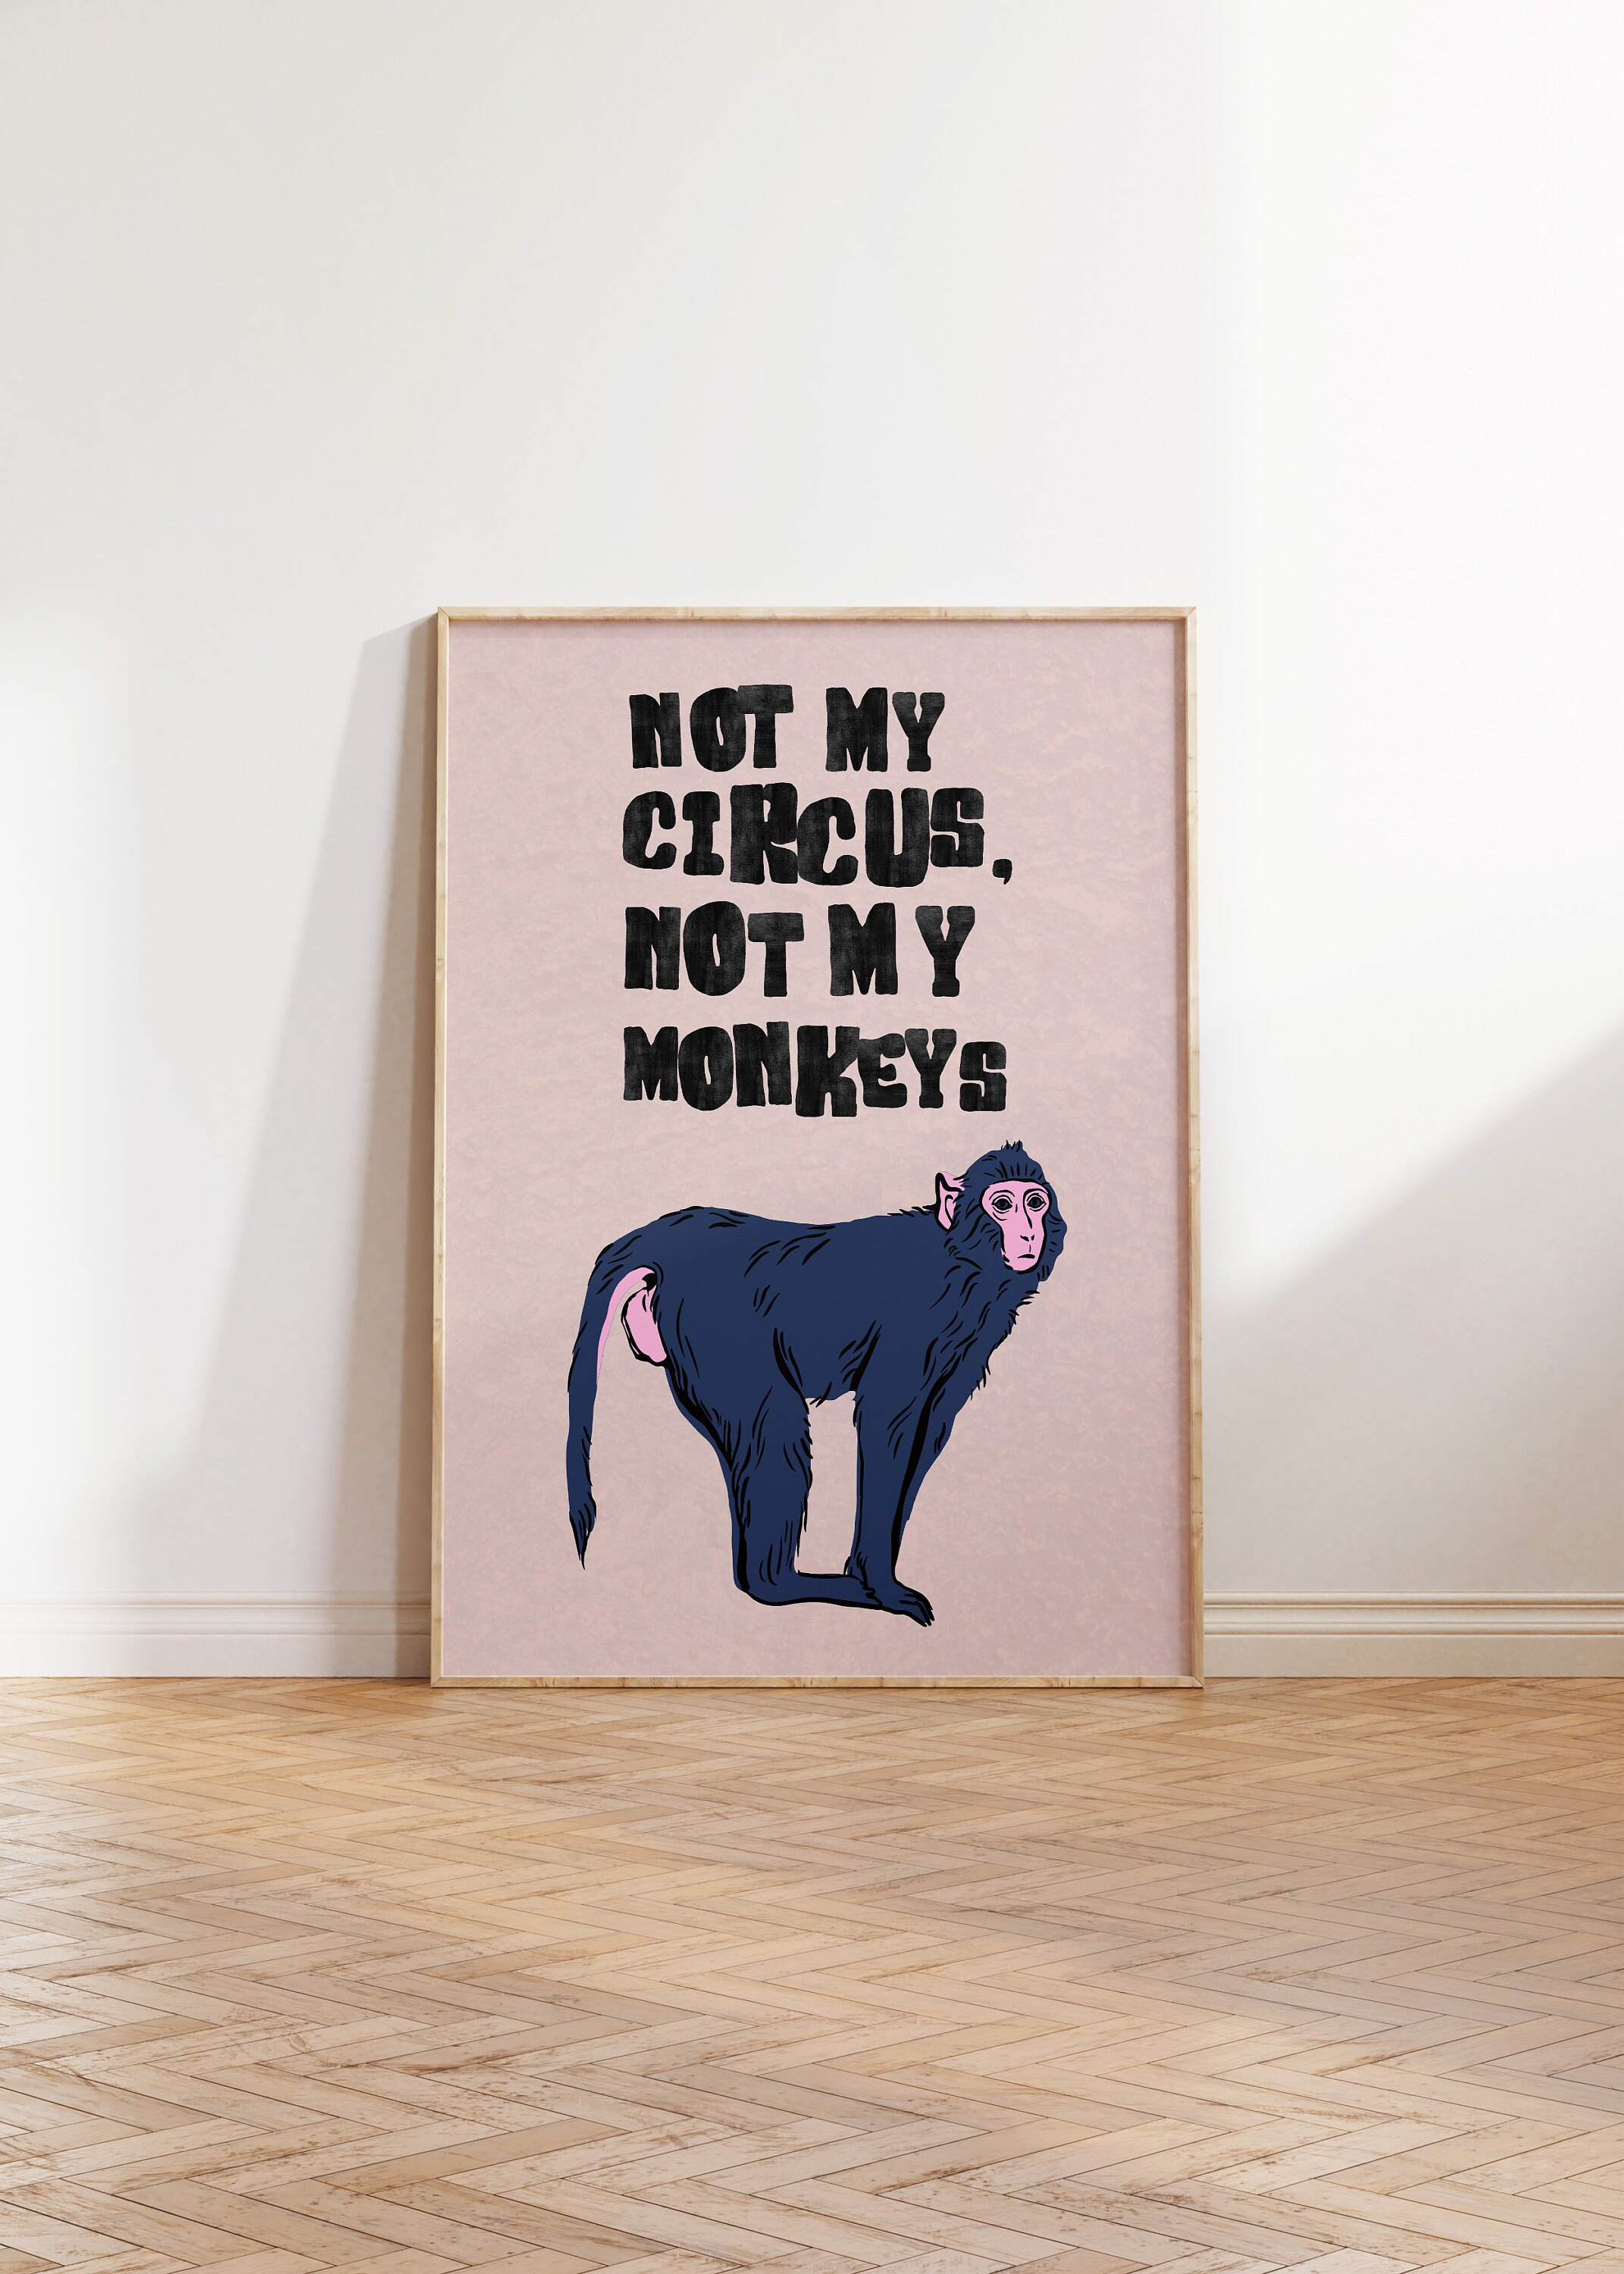 Bullying Is Not Tolerated Here Monkey Meme Tapestry Wall Hanging Funny Meme  Art Tapestry Aesthetic College Hostel Dorm Decor - AliExpress